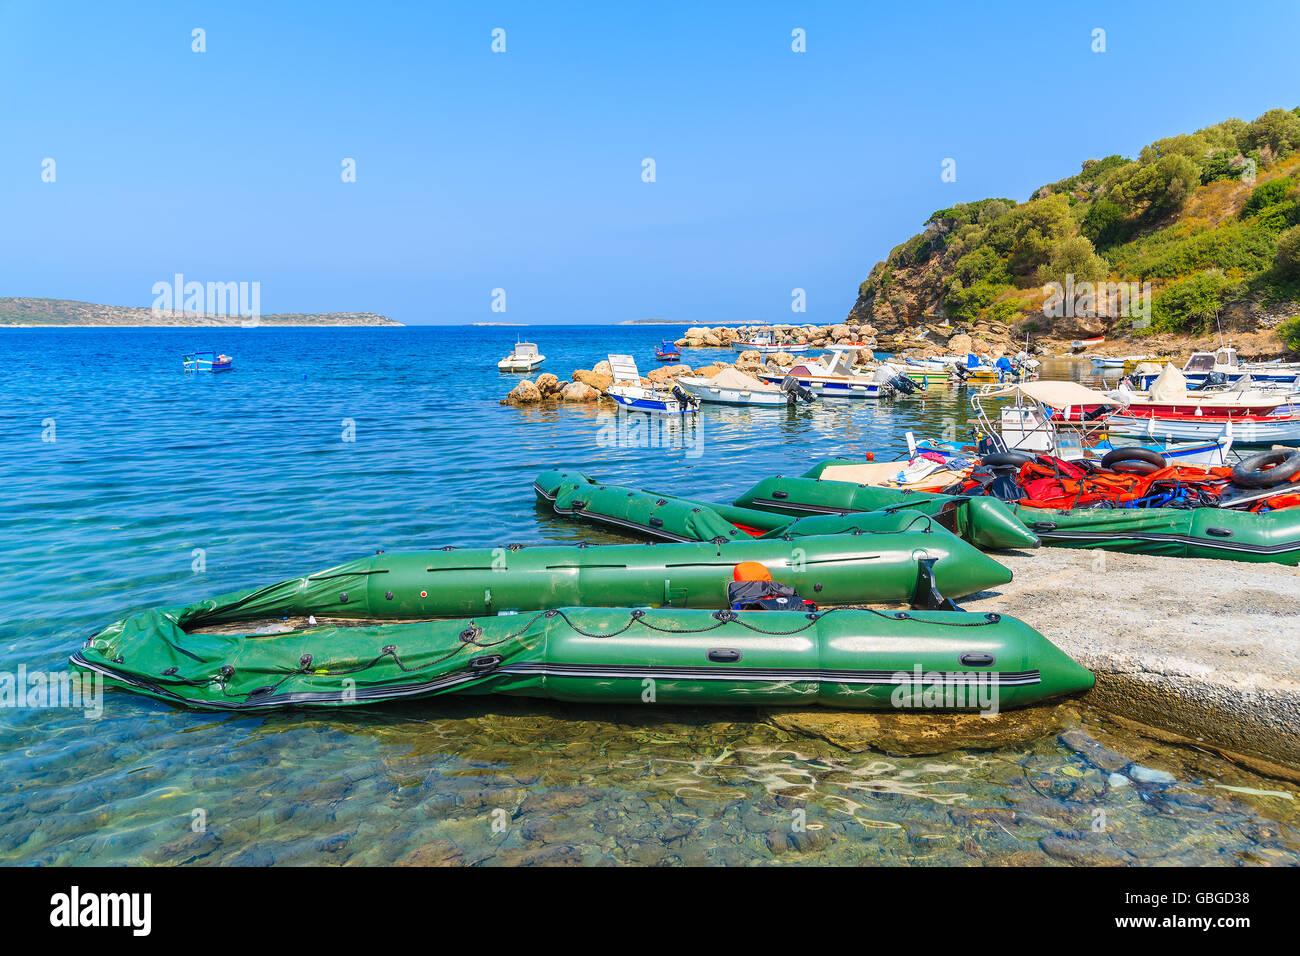 SAMOS ISLAND, GREECE - SEP 20, 2015: inflatable boats in small bay on coast of Samos island, Greece. Refugees arrive here from T Stock Photo